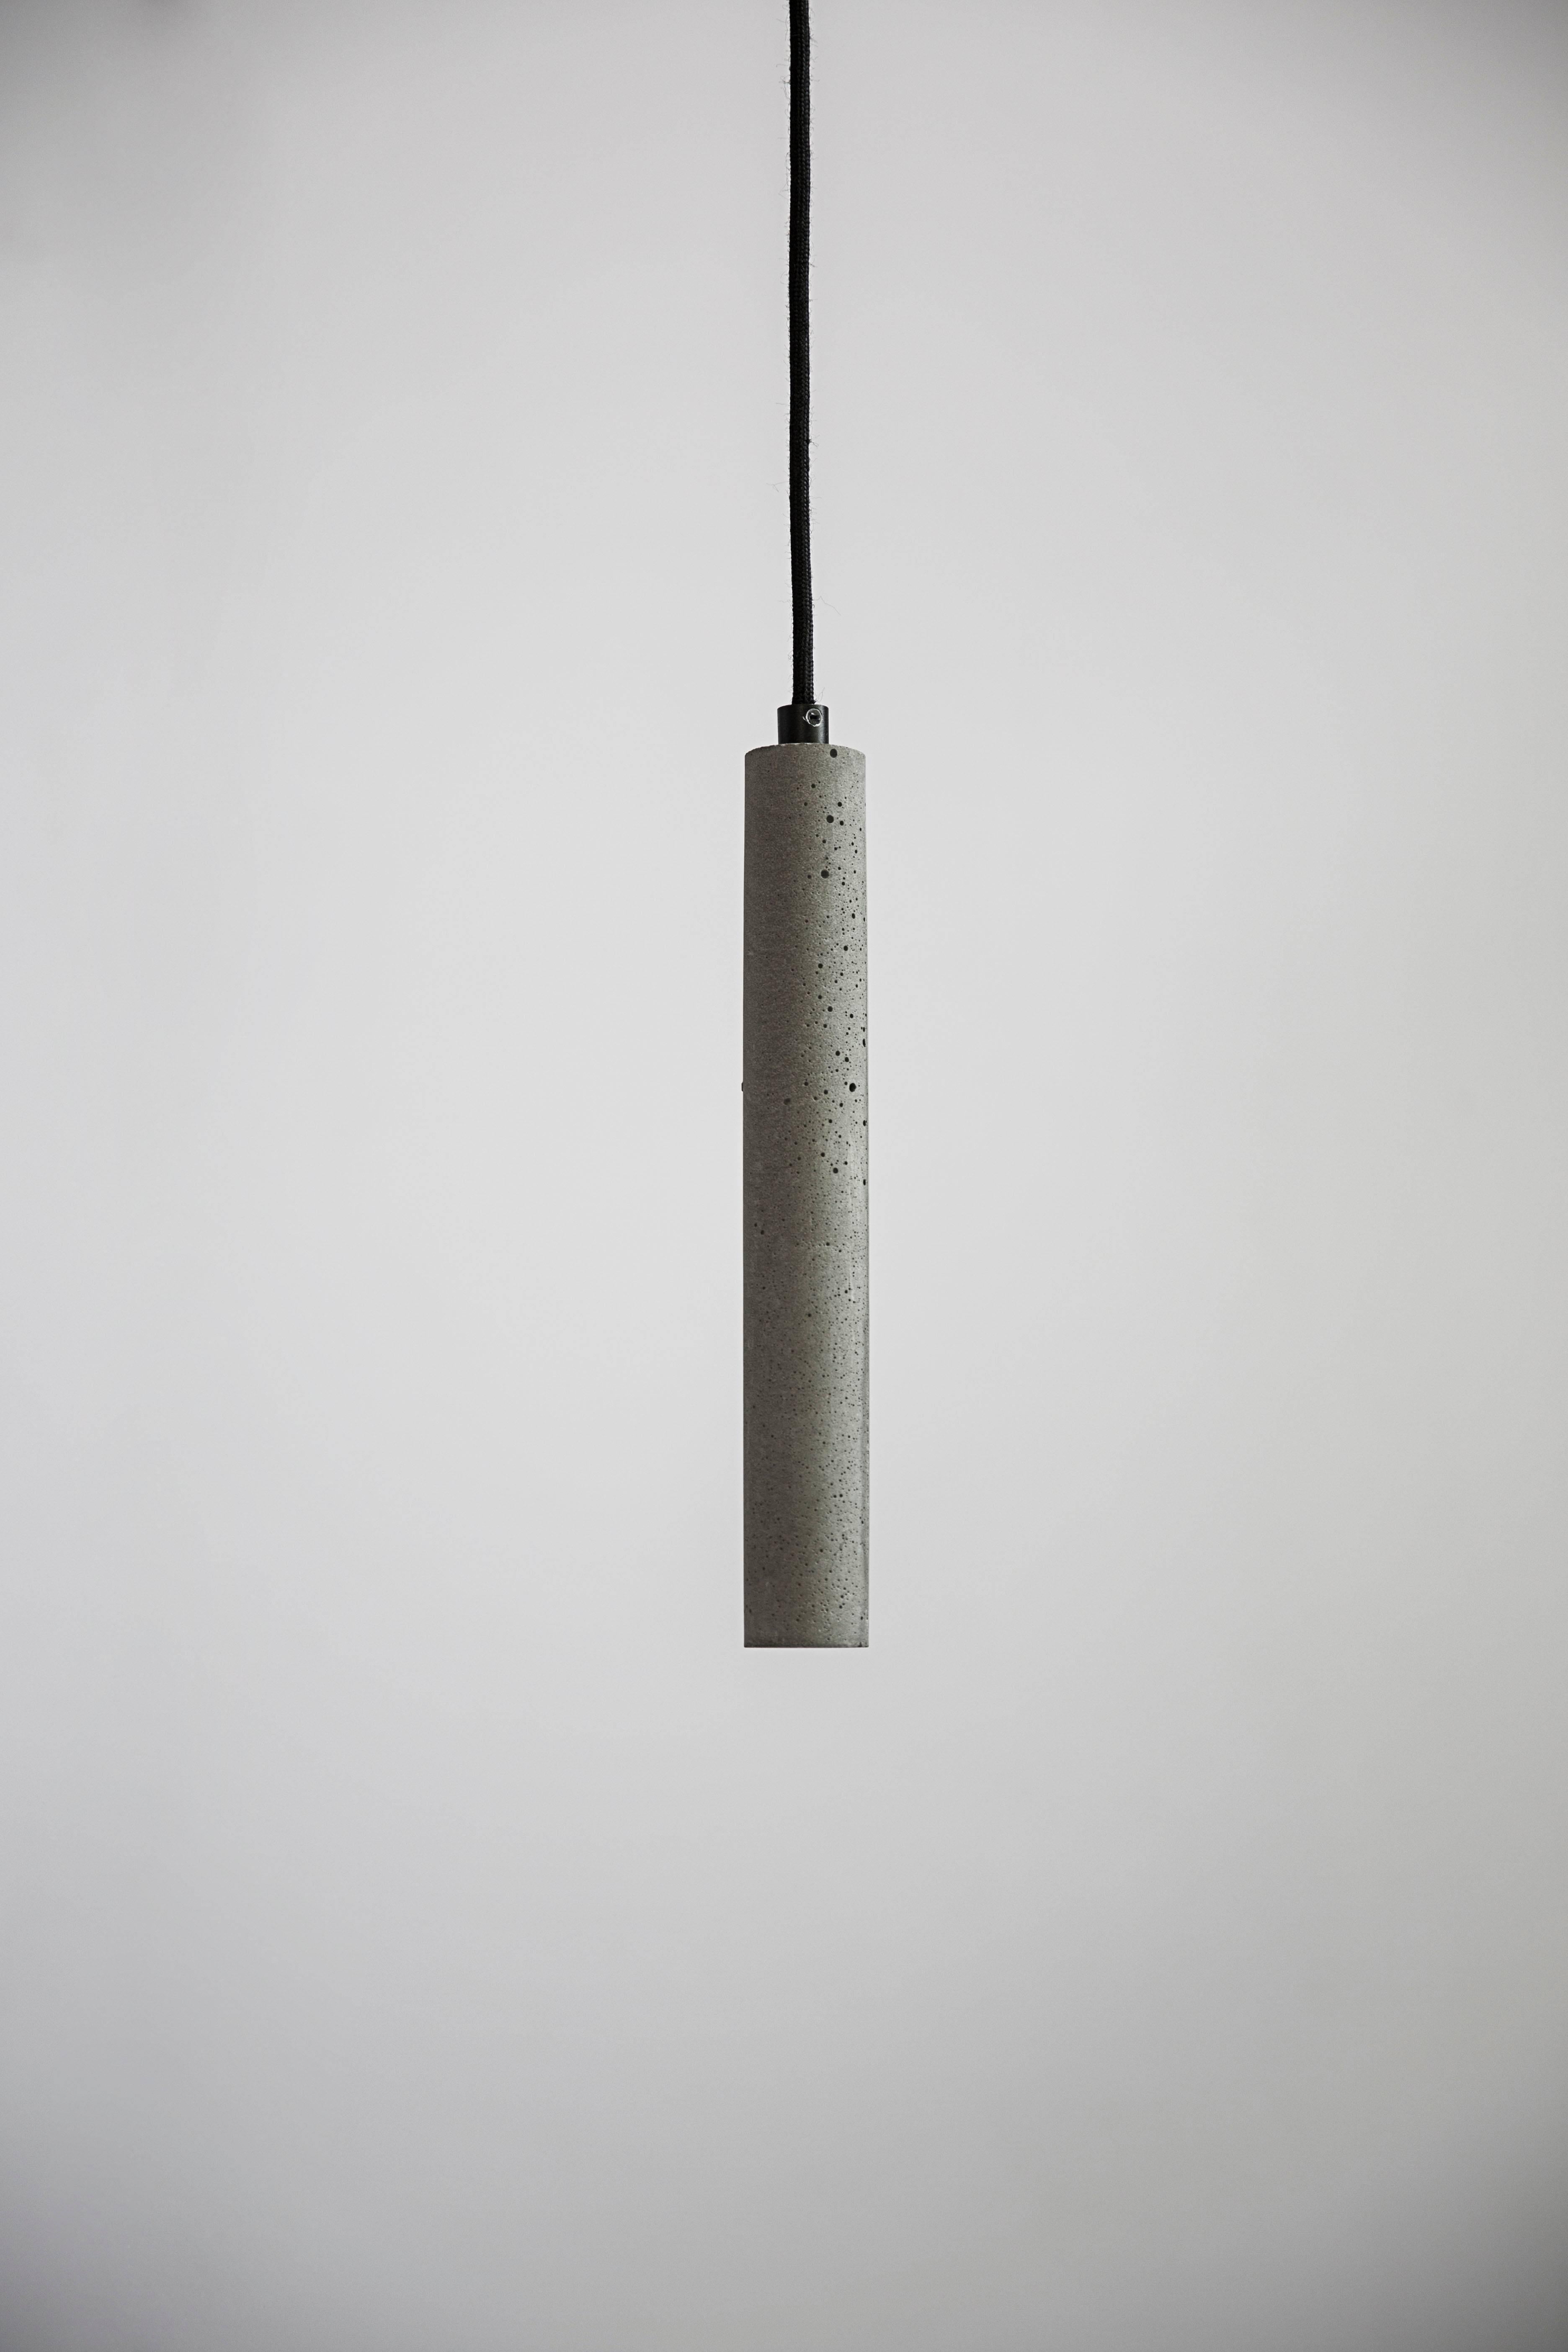 Concrete ceiling lamp designed by Cantonese studio Bentu Design.

(Sold individually)

31 cm High; 4 cm Diameter
Wire: 2Meters Black (adjustable)
Lamp Type: G9 LED 2W 100-240V 80Ra 135LM 3000K (compatible with US electric system)

........
“Bang”